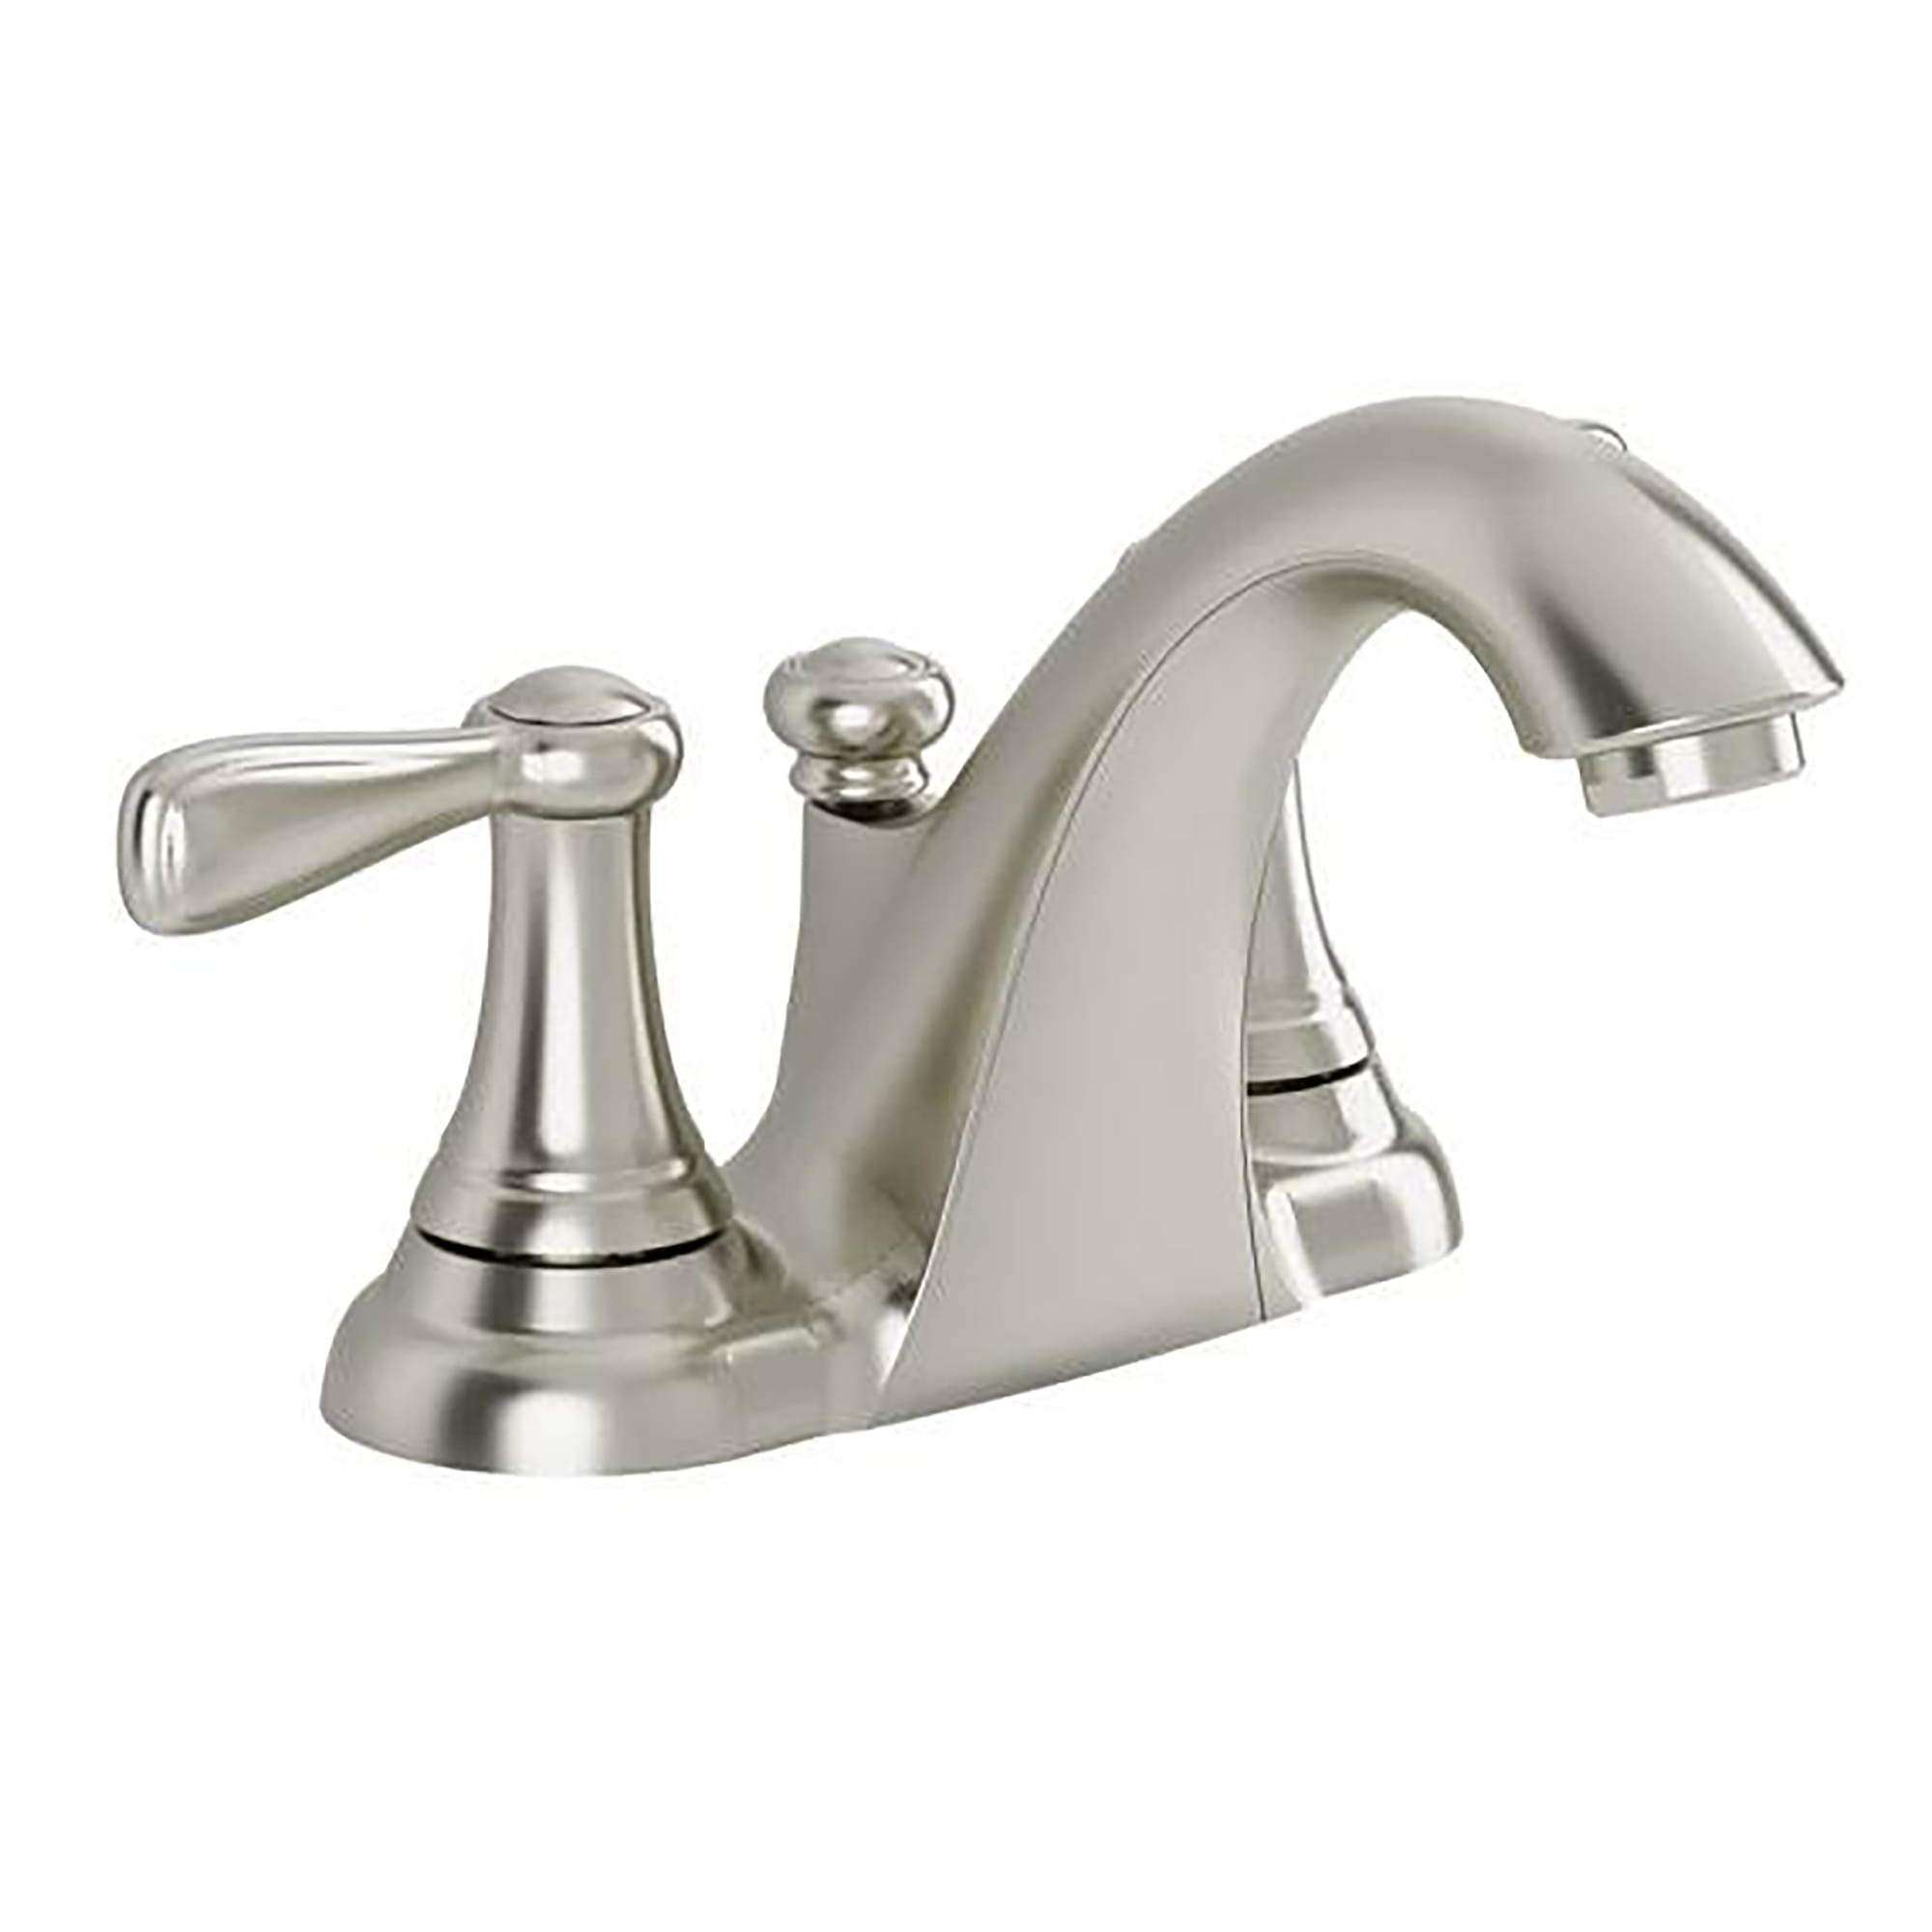 Marquette 4-Inch Centerset 2-Handle Low-Arc Bathroom Faucet 1.5 GPM with Drain